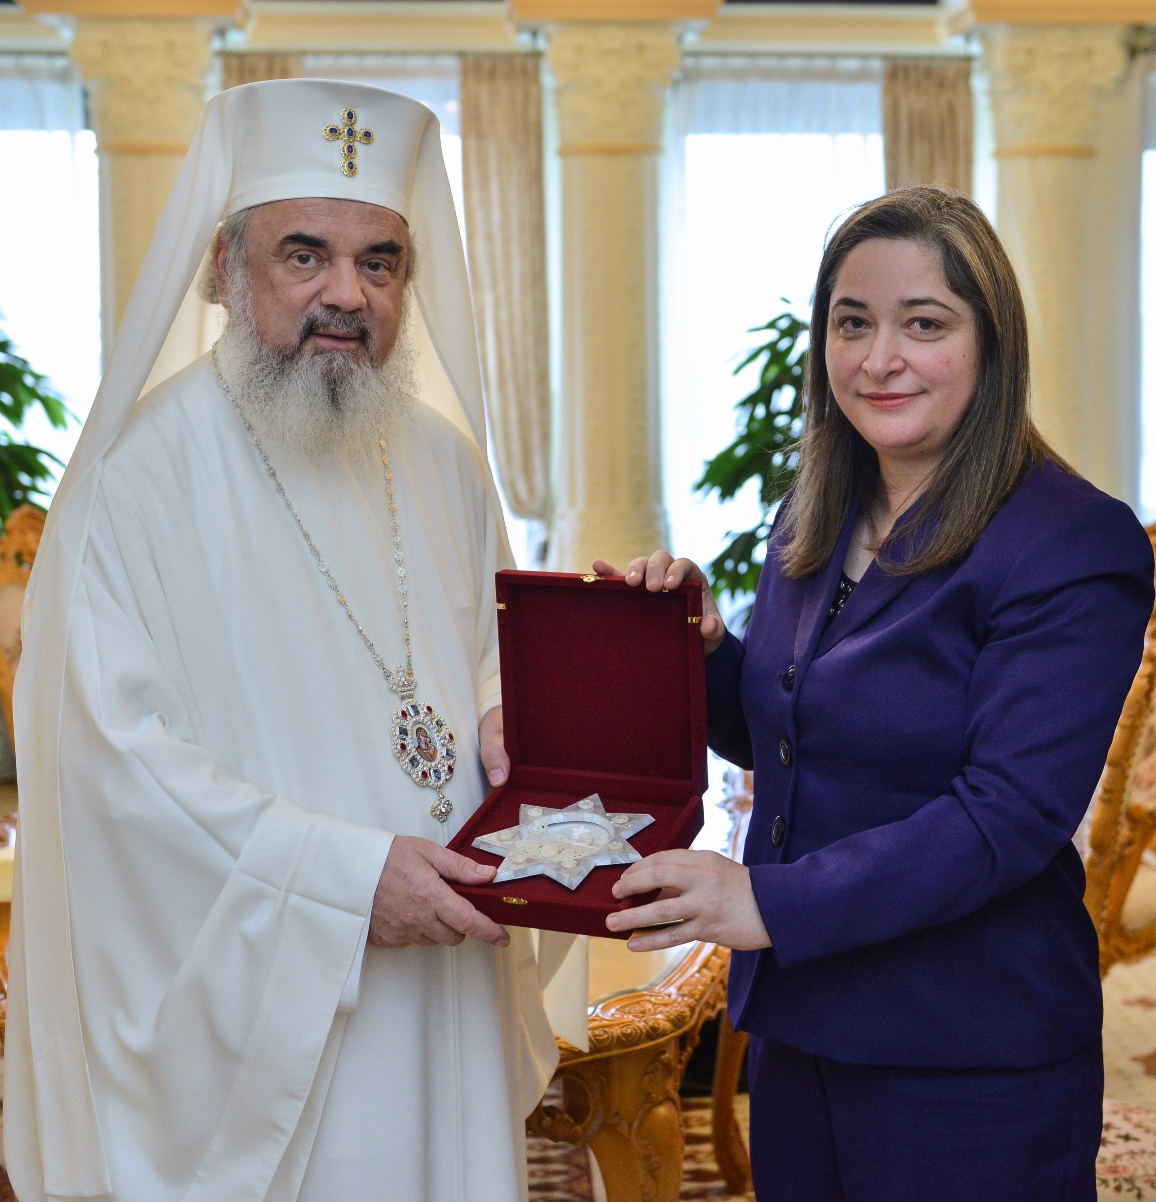 The Palestinian Tourism Minister visited the Romanian Patriarchate